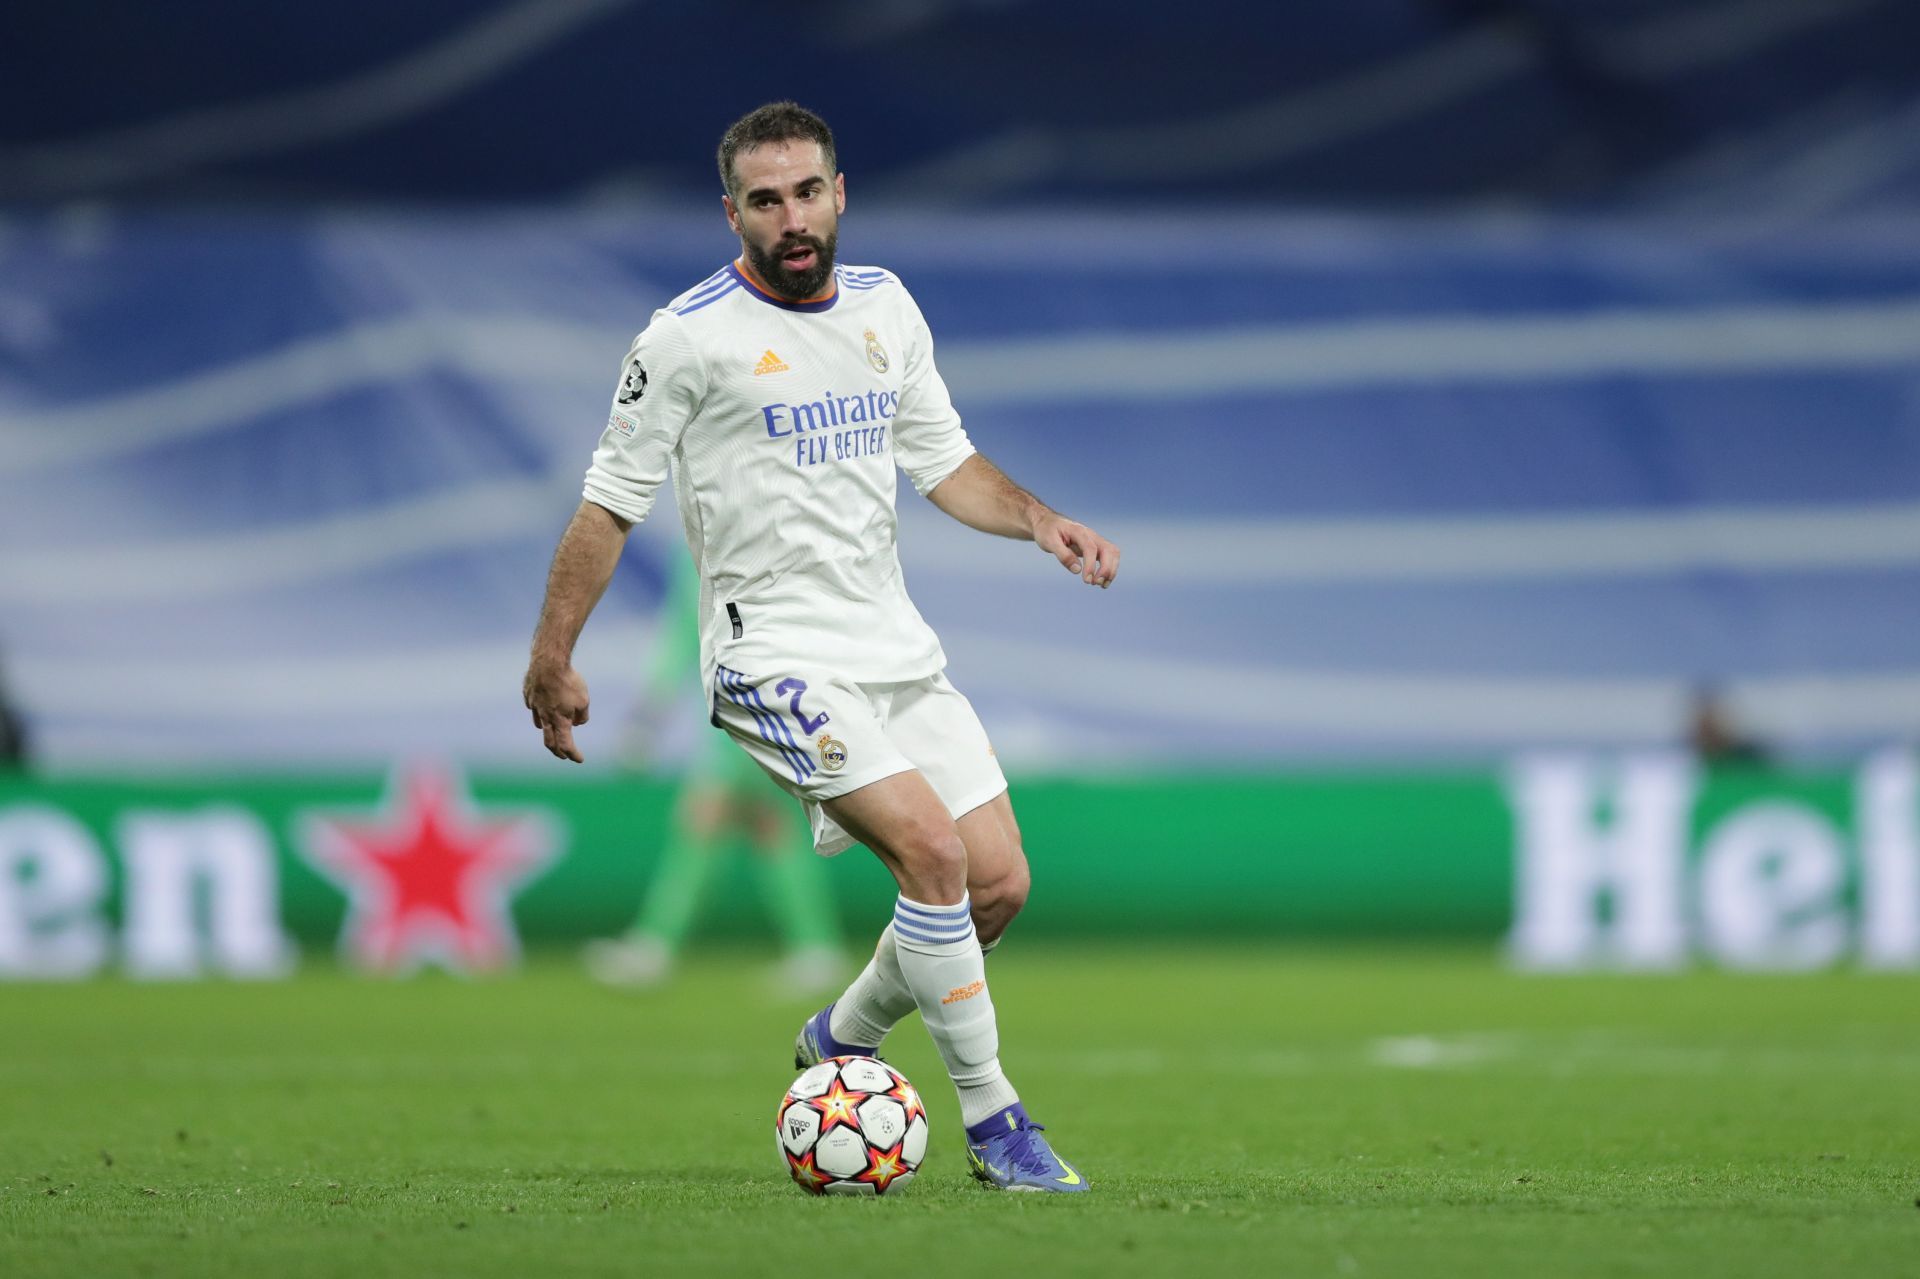 Carvajal will have to play well